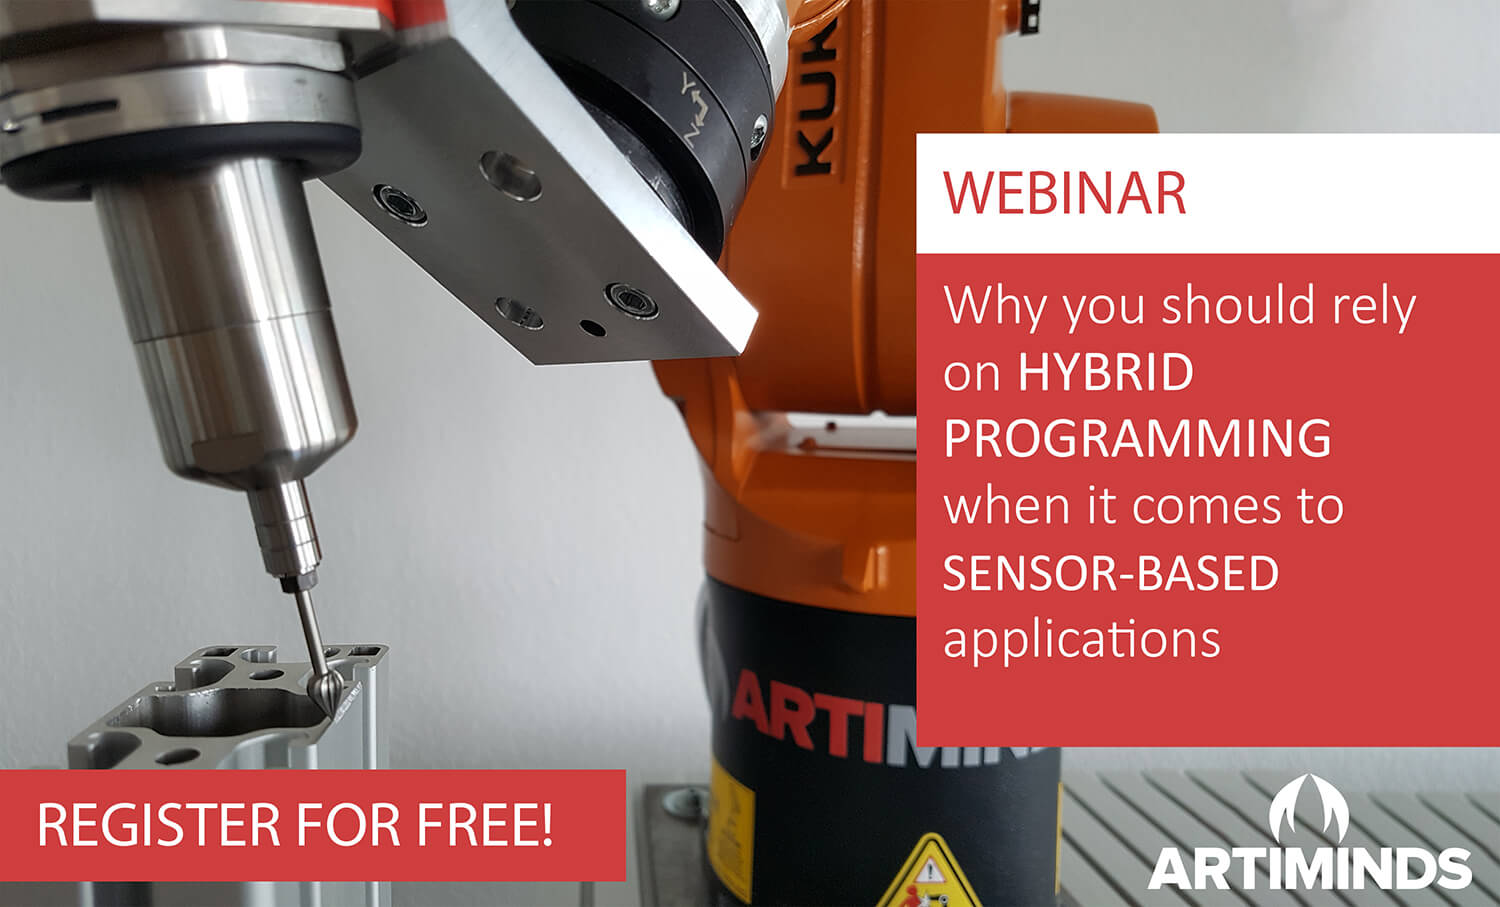 Webinar: Why you should rely on hybrid programming when it comes to sensor- based applications